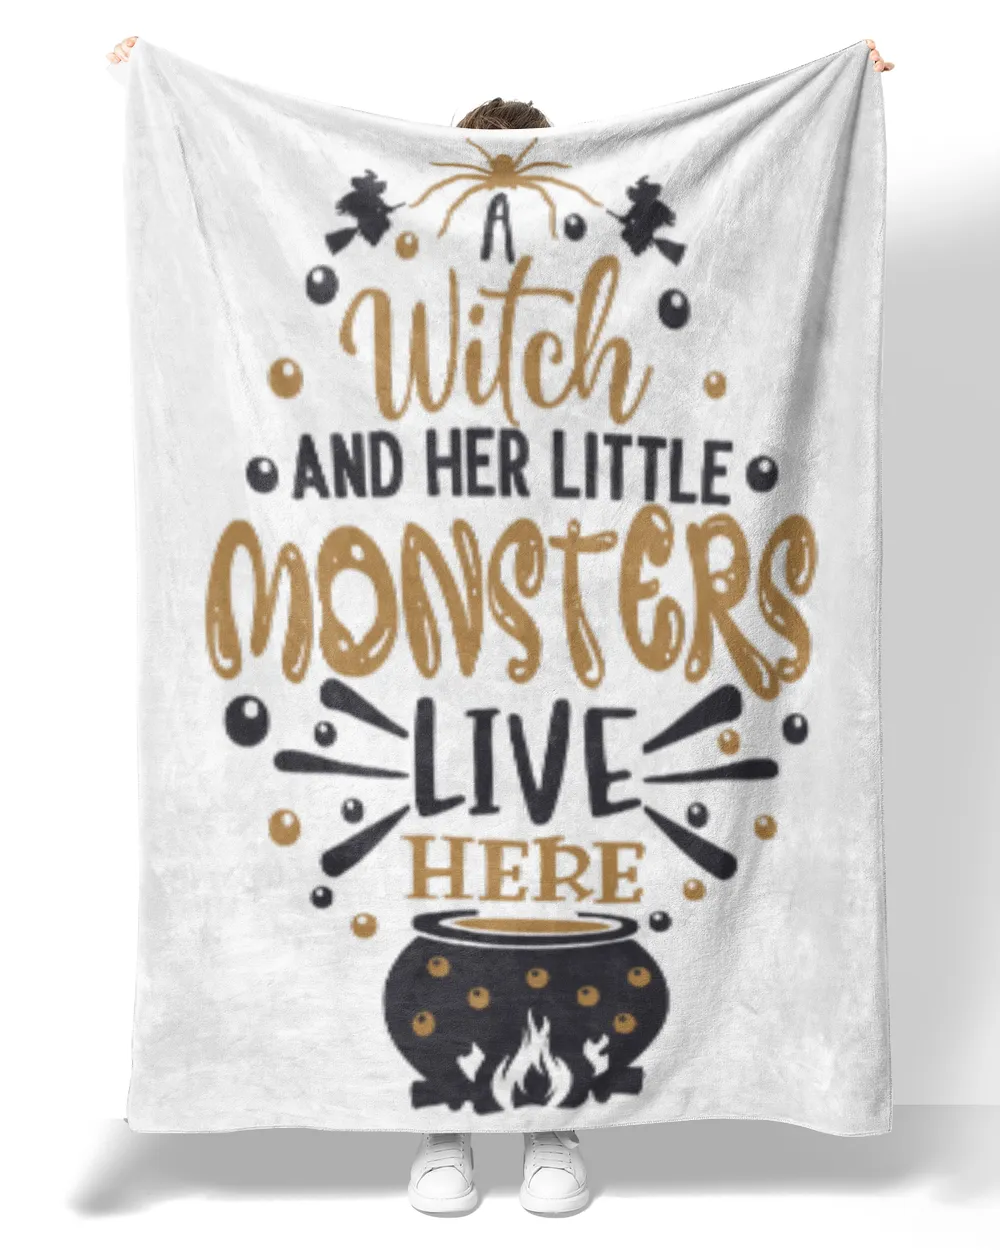 A Witch and her little monsters live here